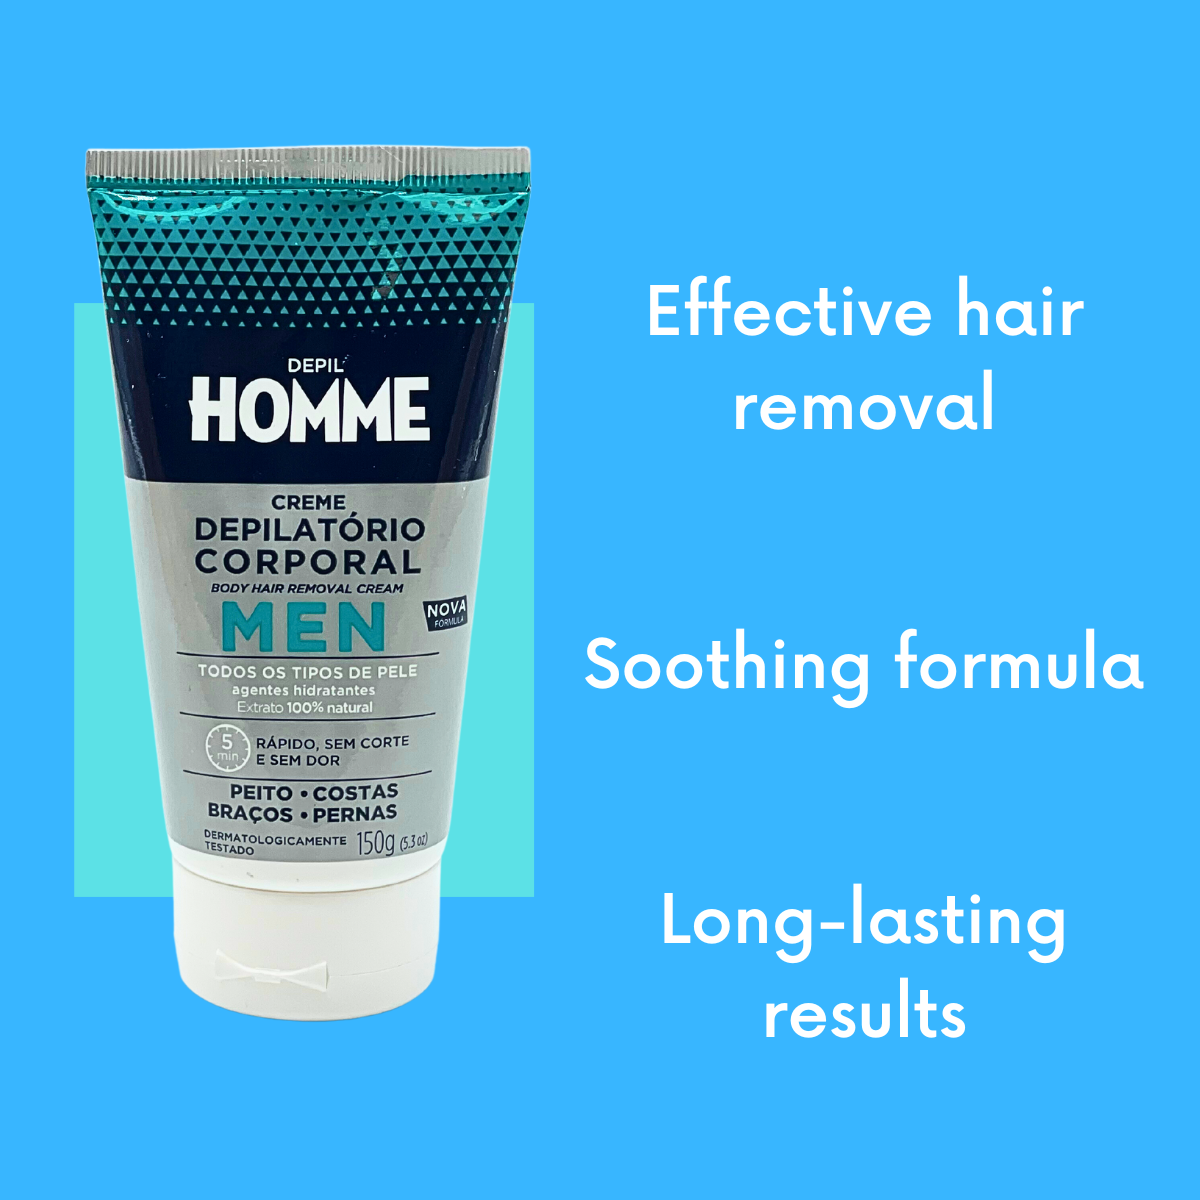 Depil HOMME Hair Removal Body Cream, Soothing Depilatory Cream 150g (6 Pack) - Buy professional cosmetics dedicated to hair removal